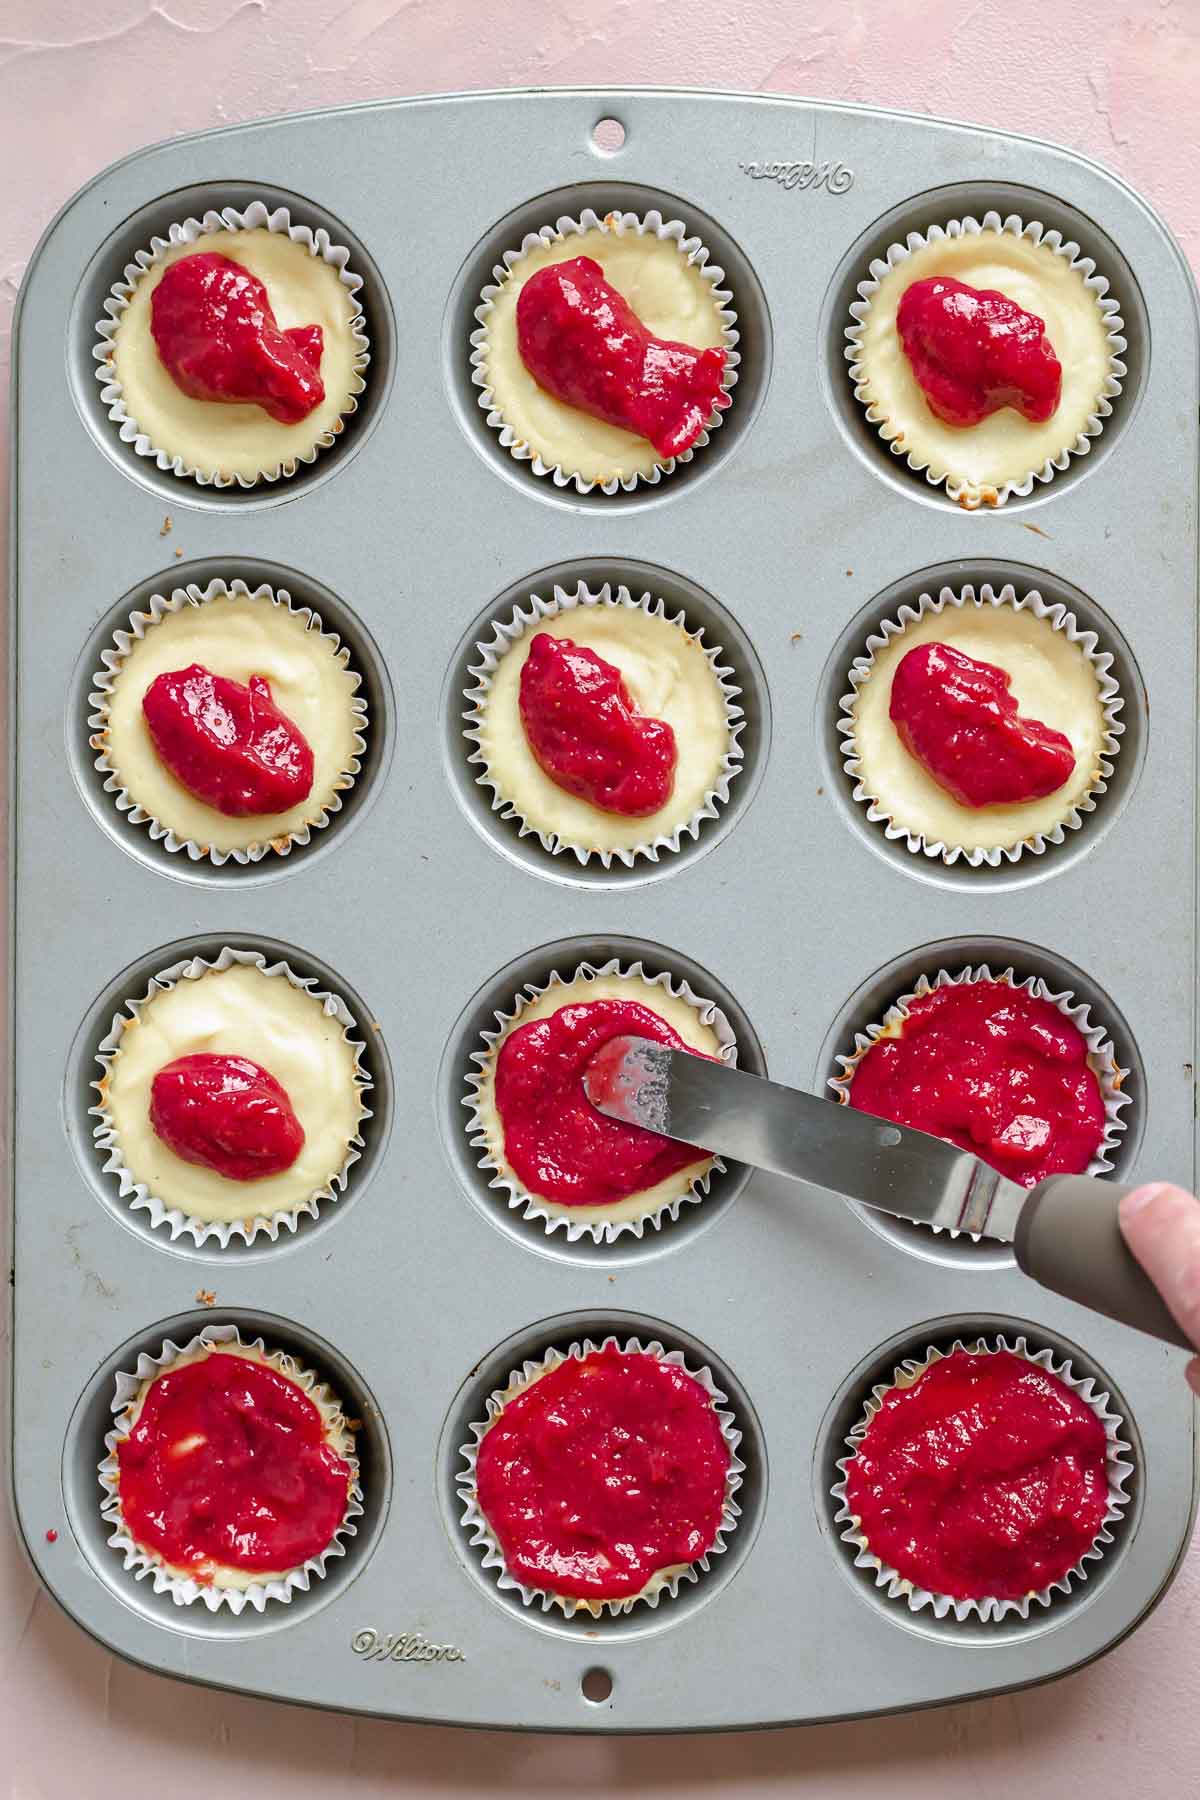 A rubber spatula spreads strawberry sauce onto baked mini cheesecakes.